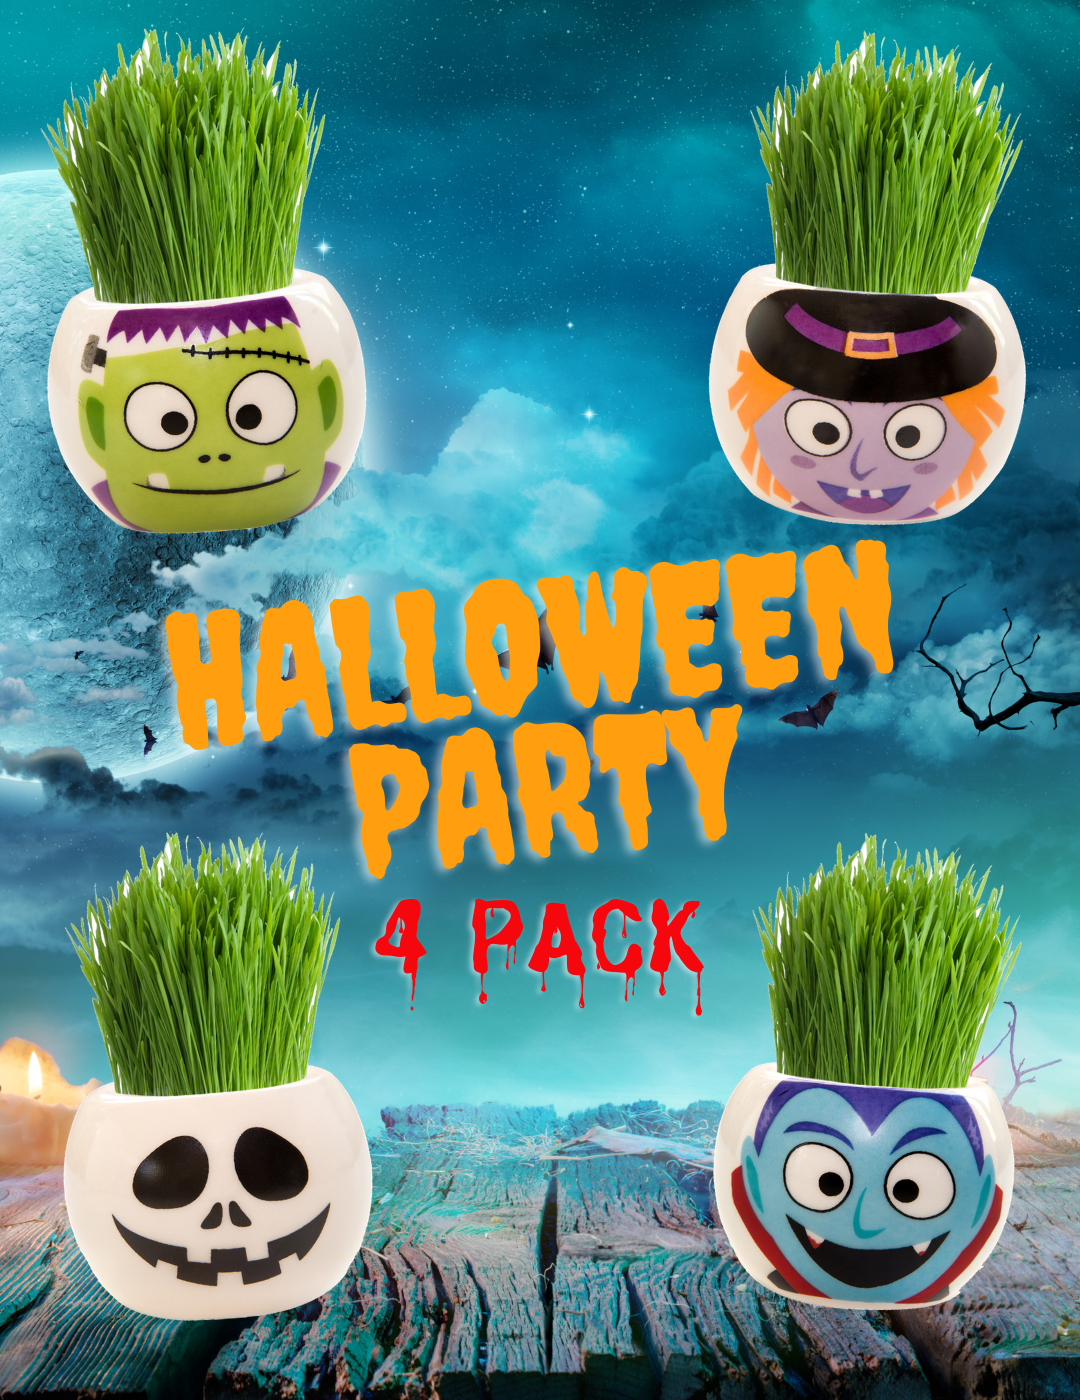 Grass Hair Kit - Halloween Party 4 Pack